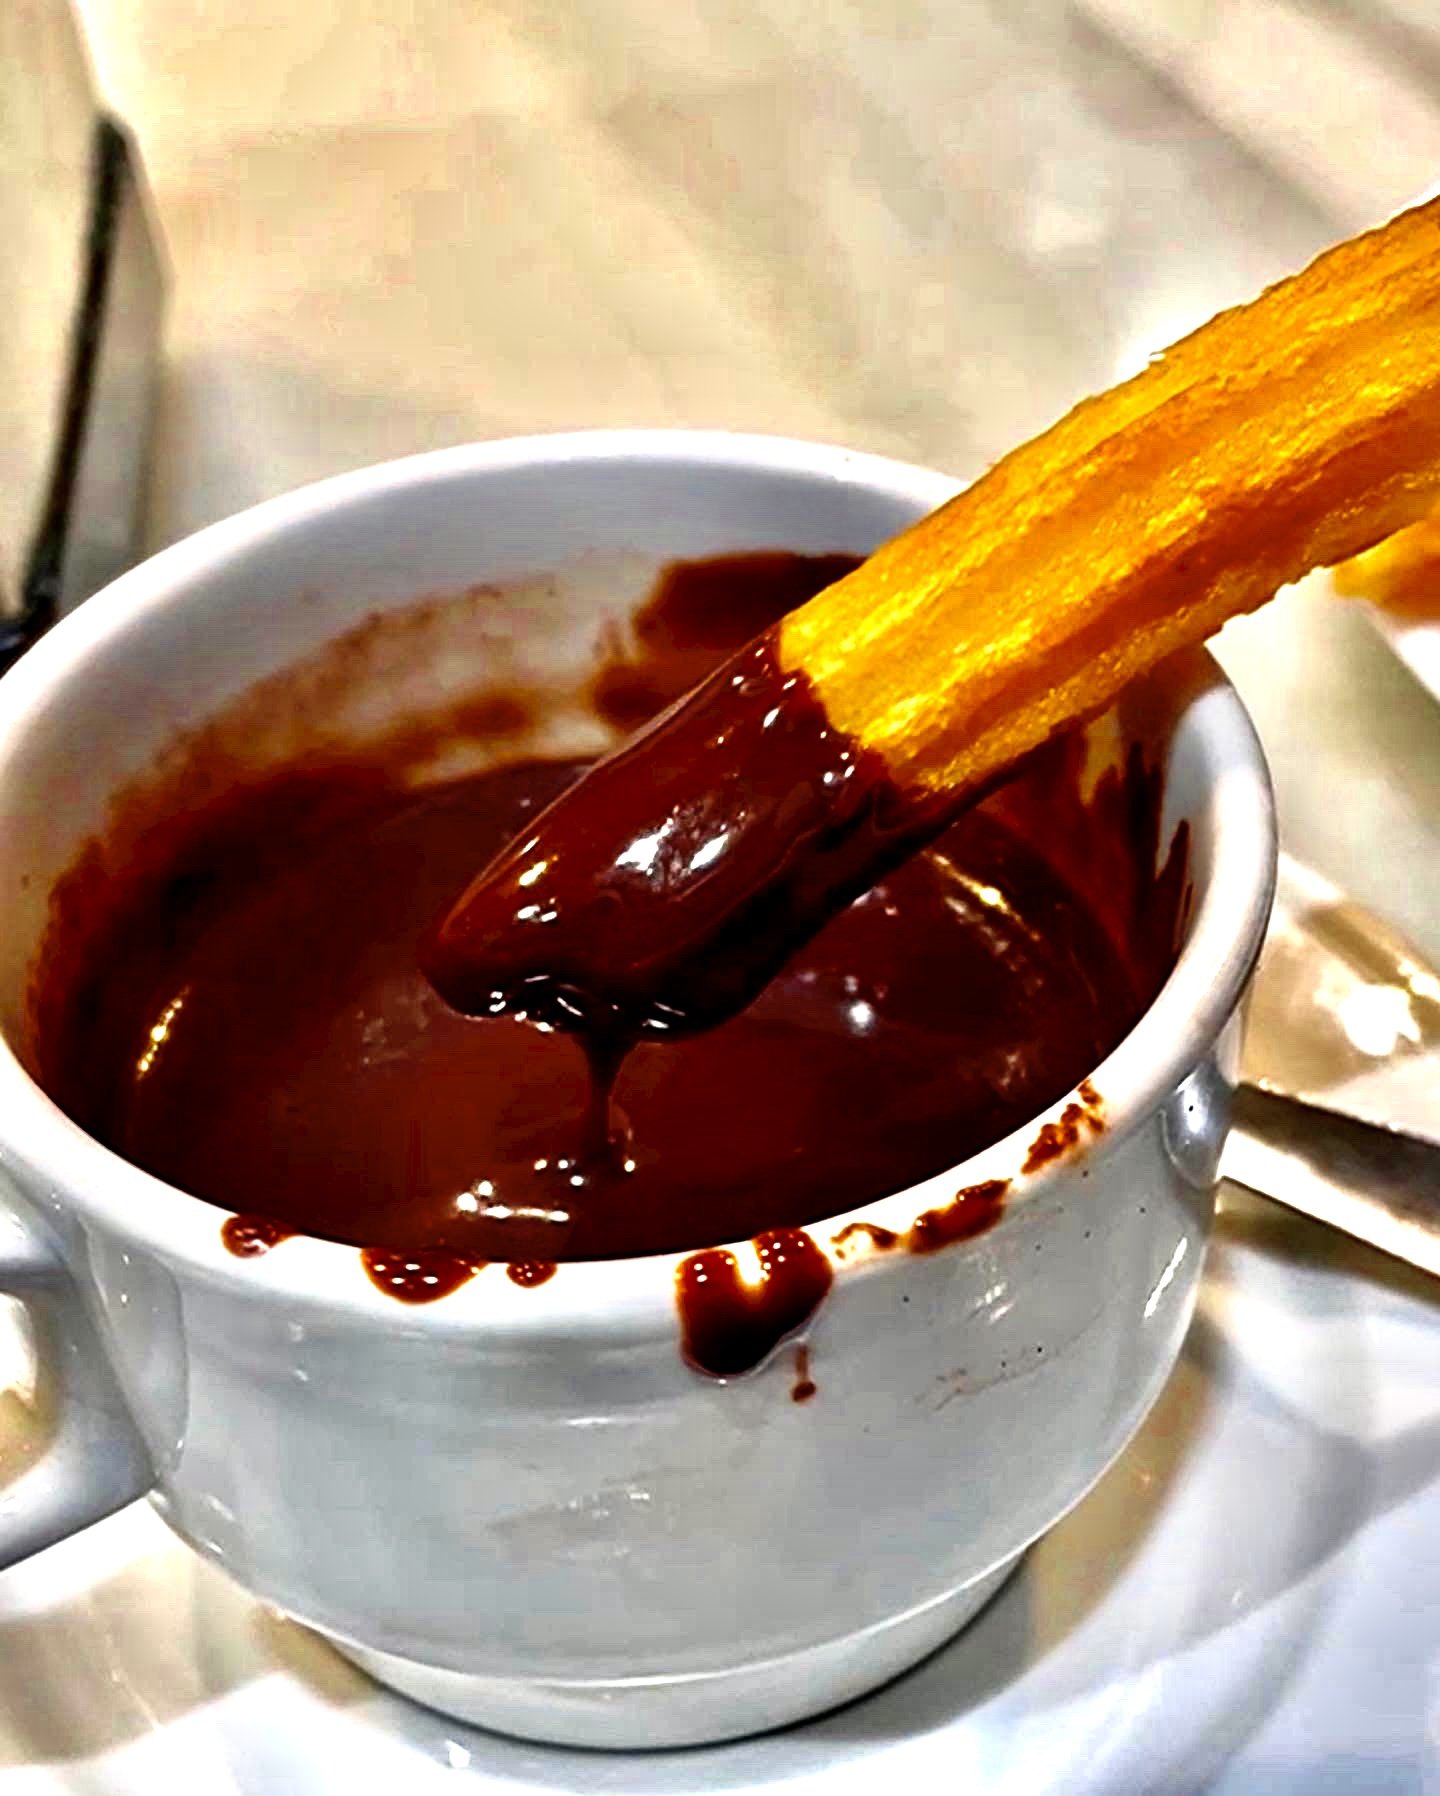 Chocolate with Churros